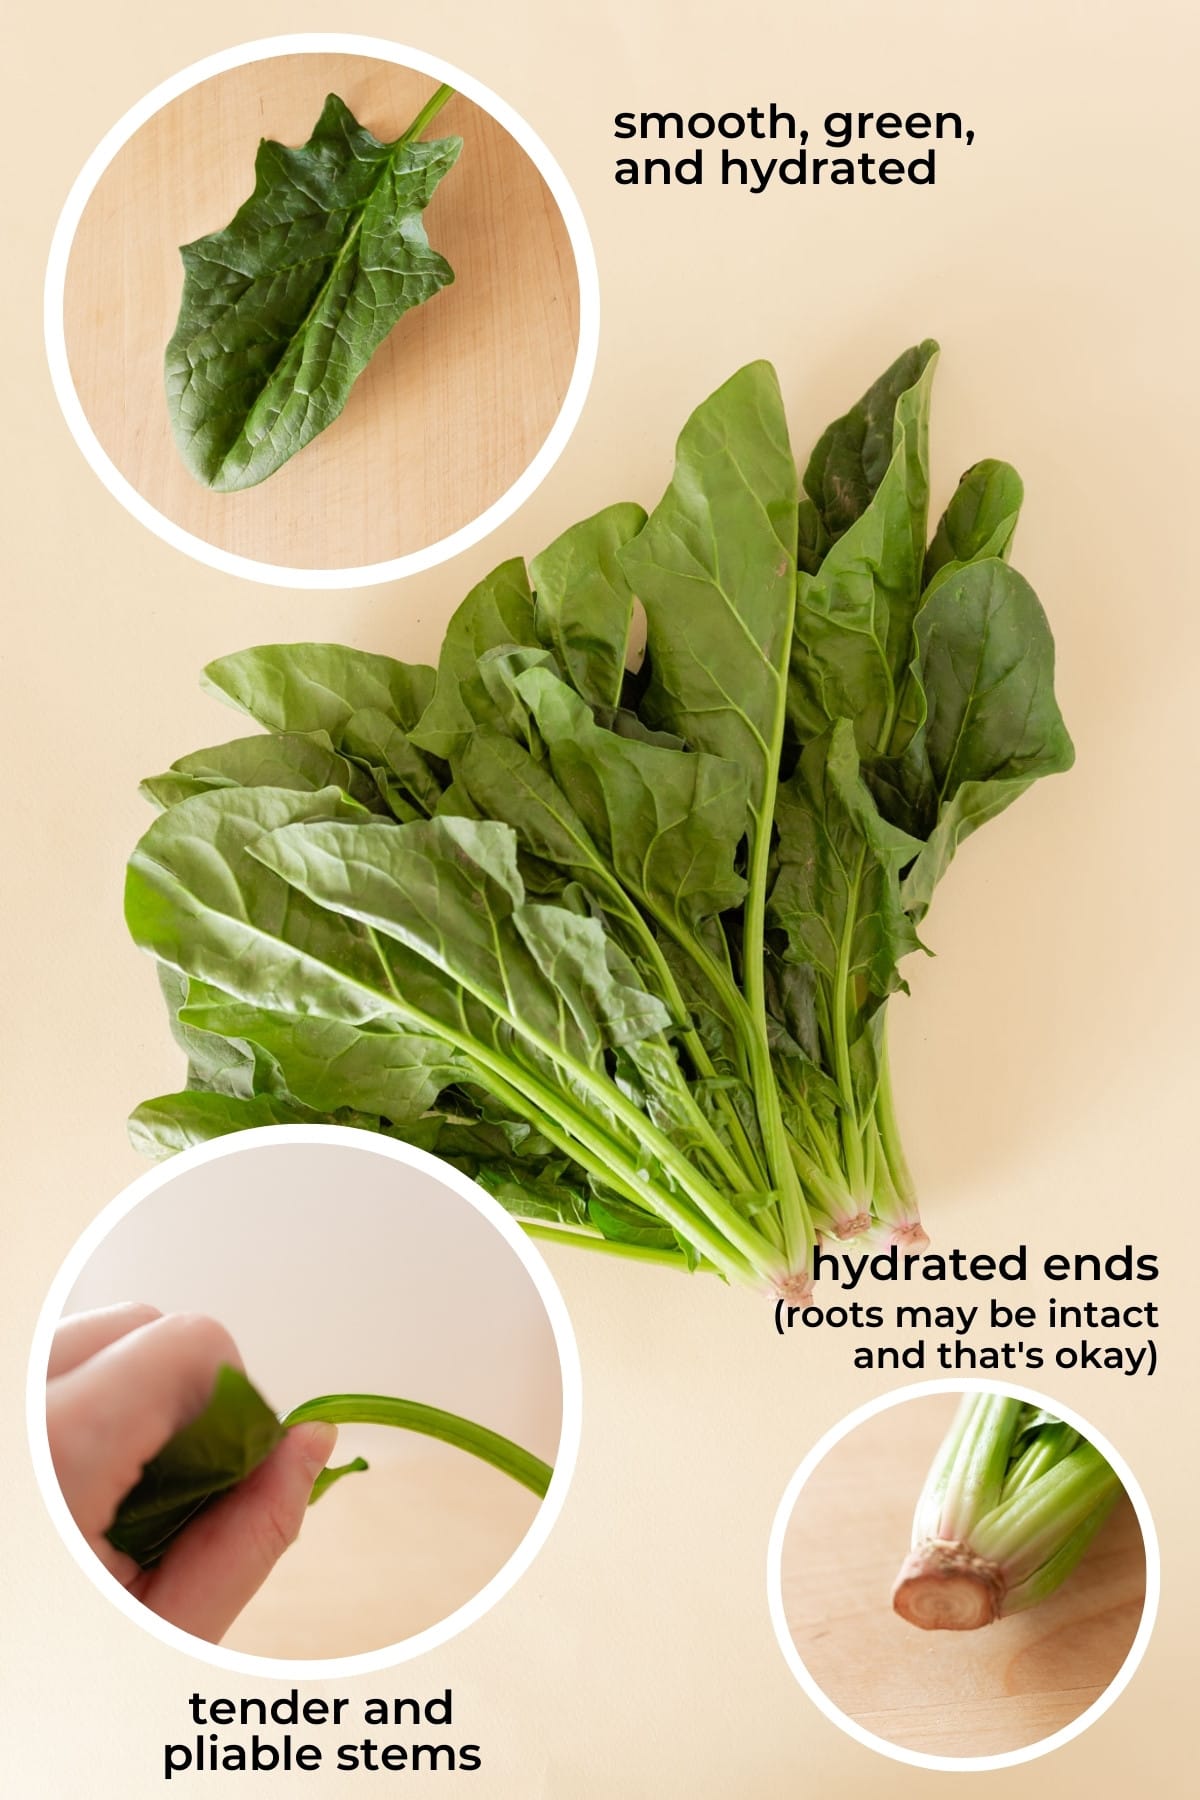 A bunch of taiwan spinach on a pale yellow background with closeup photos and text showing visual cues to look for (smooth, green, and hydrated leaves; tender and pliable stems; hydrated ends where the roots may or may not be intact).